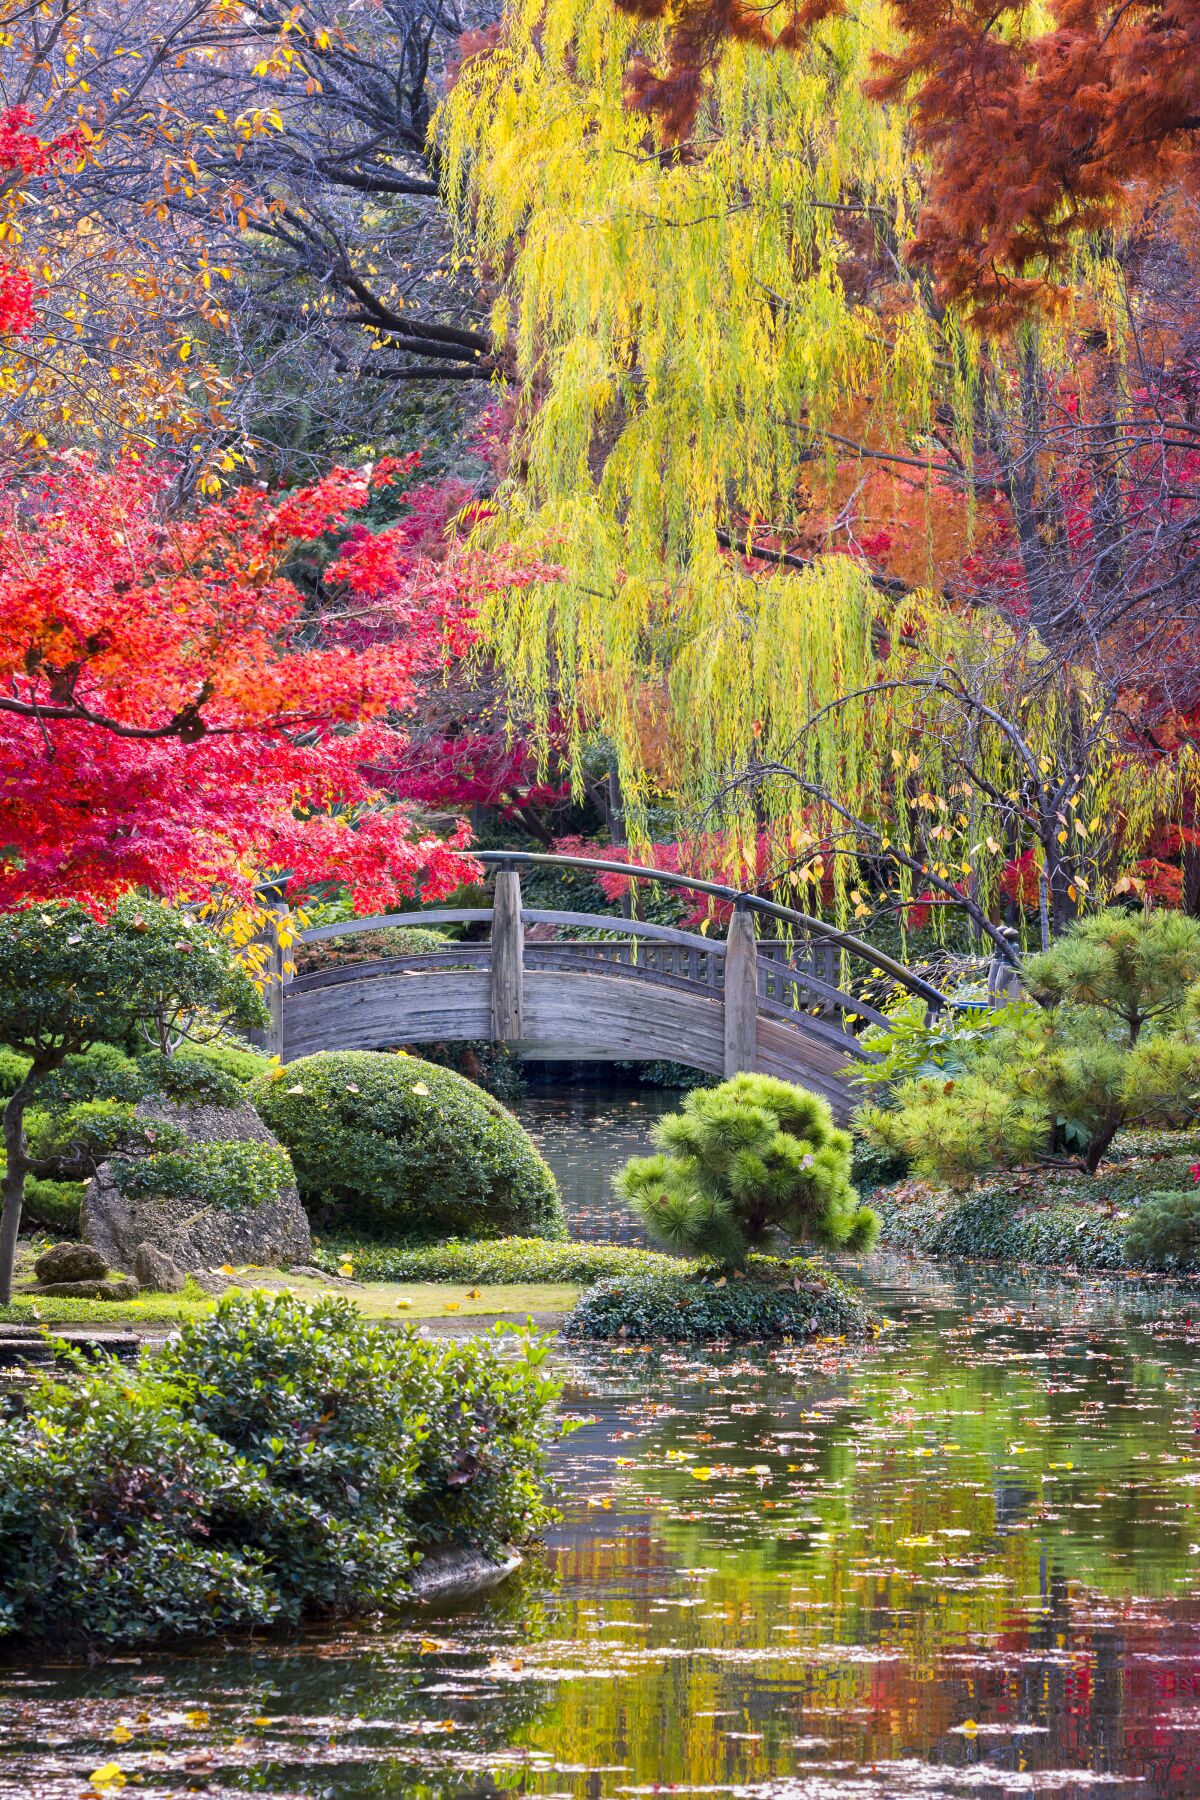 The colorful Fort Worth Japanese Garden is shown.